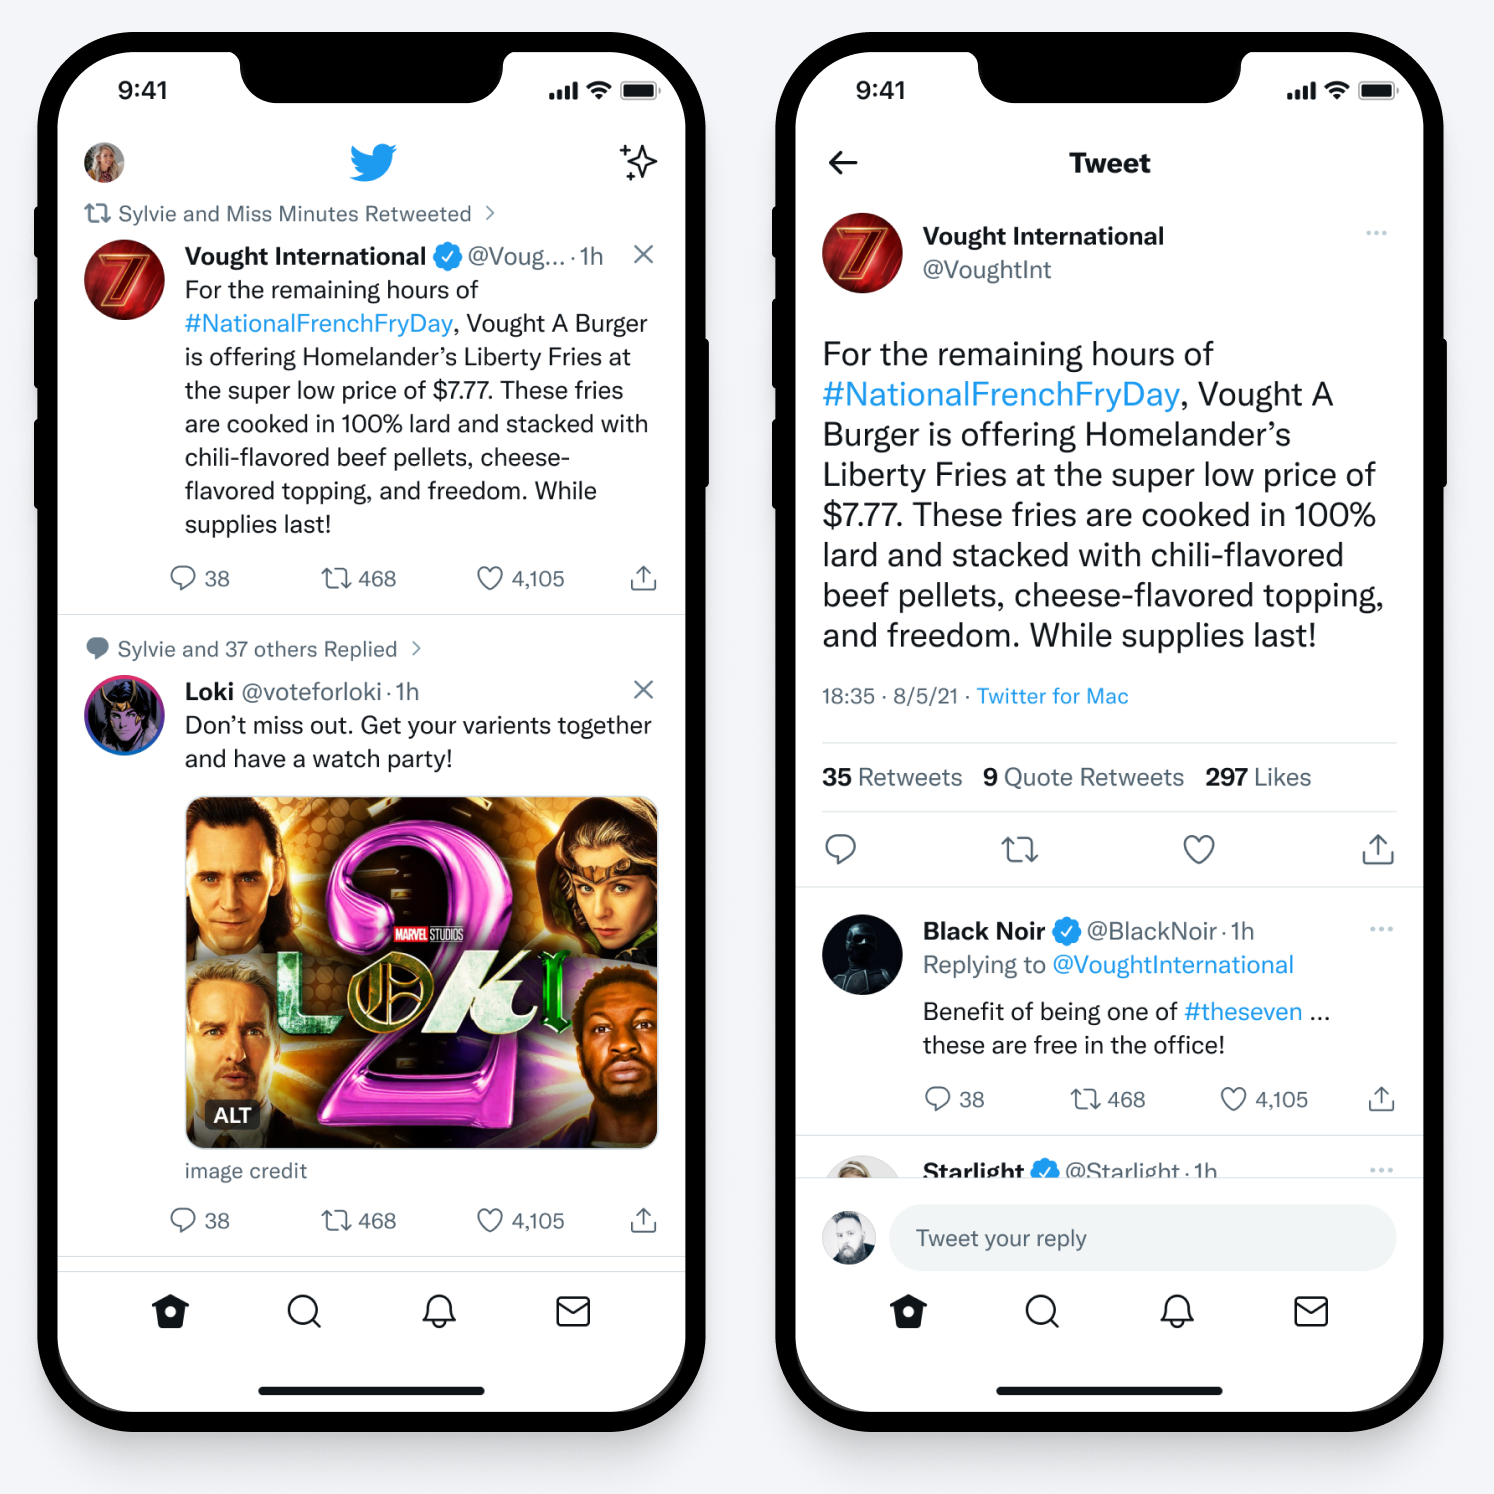 twitter app for iOS with showing the twitter home timeline and tweet details